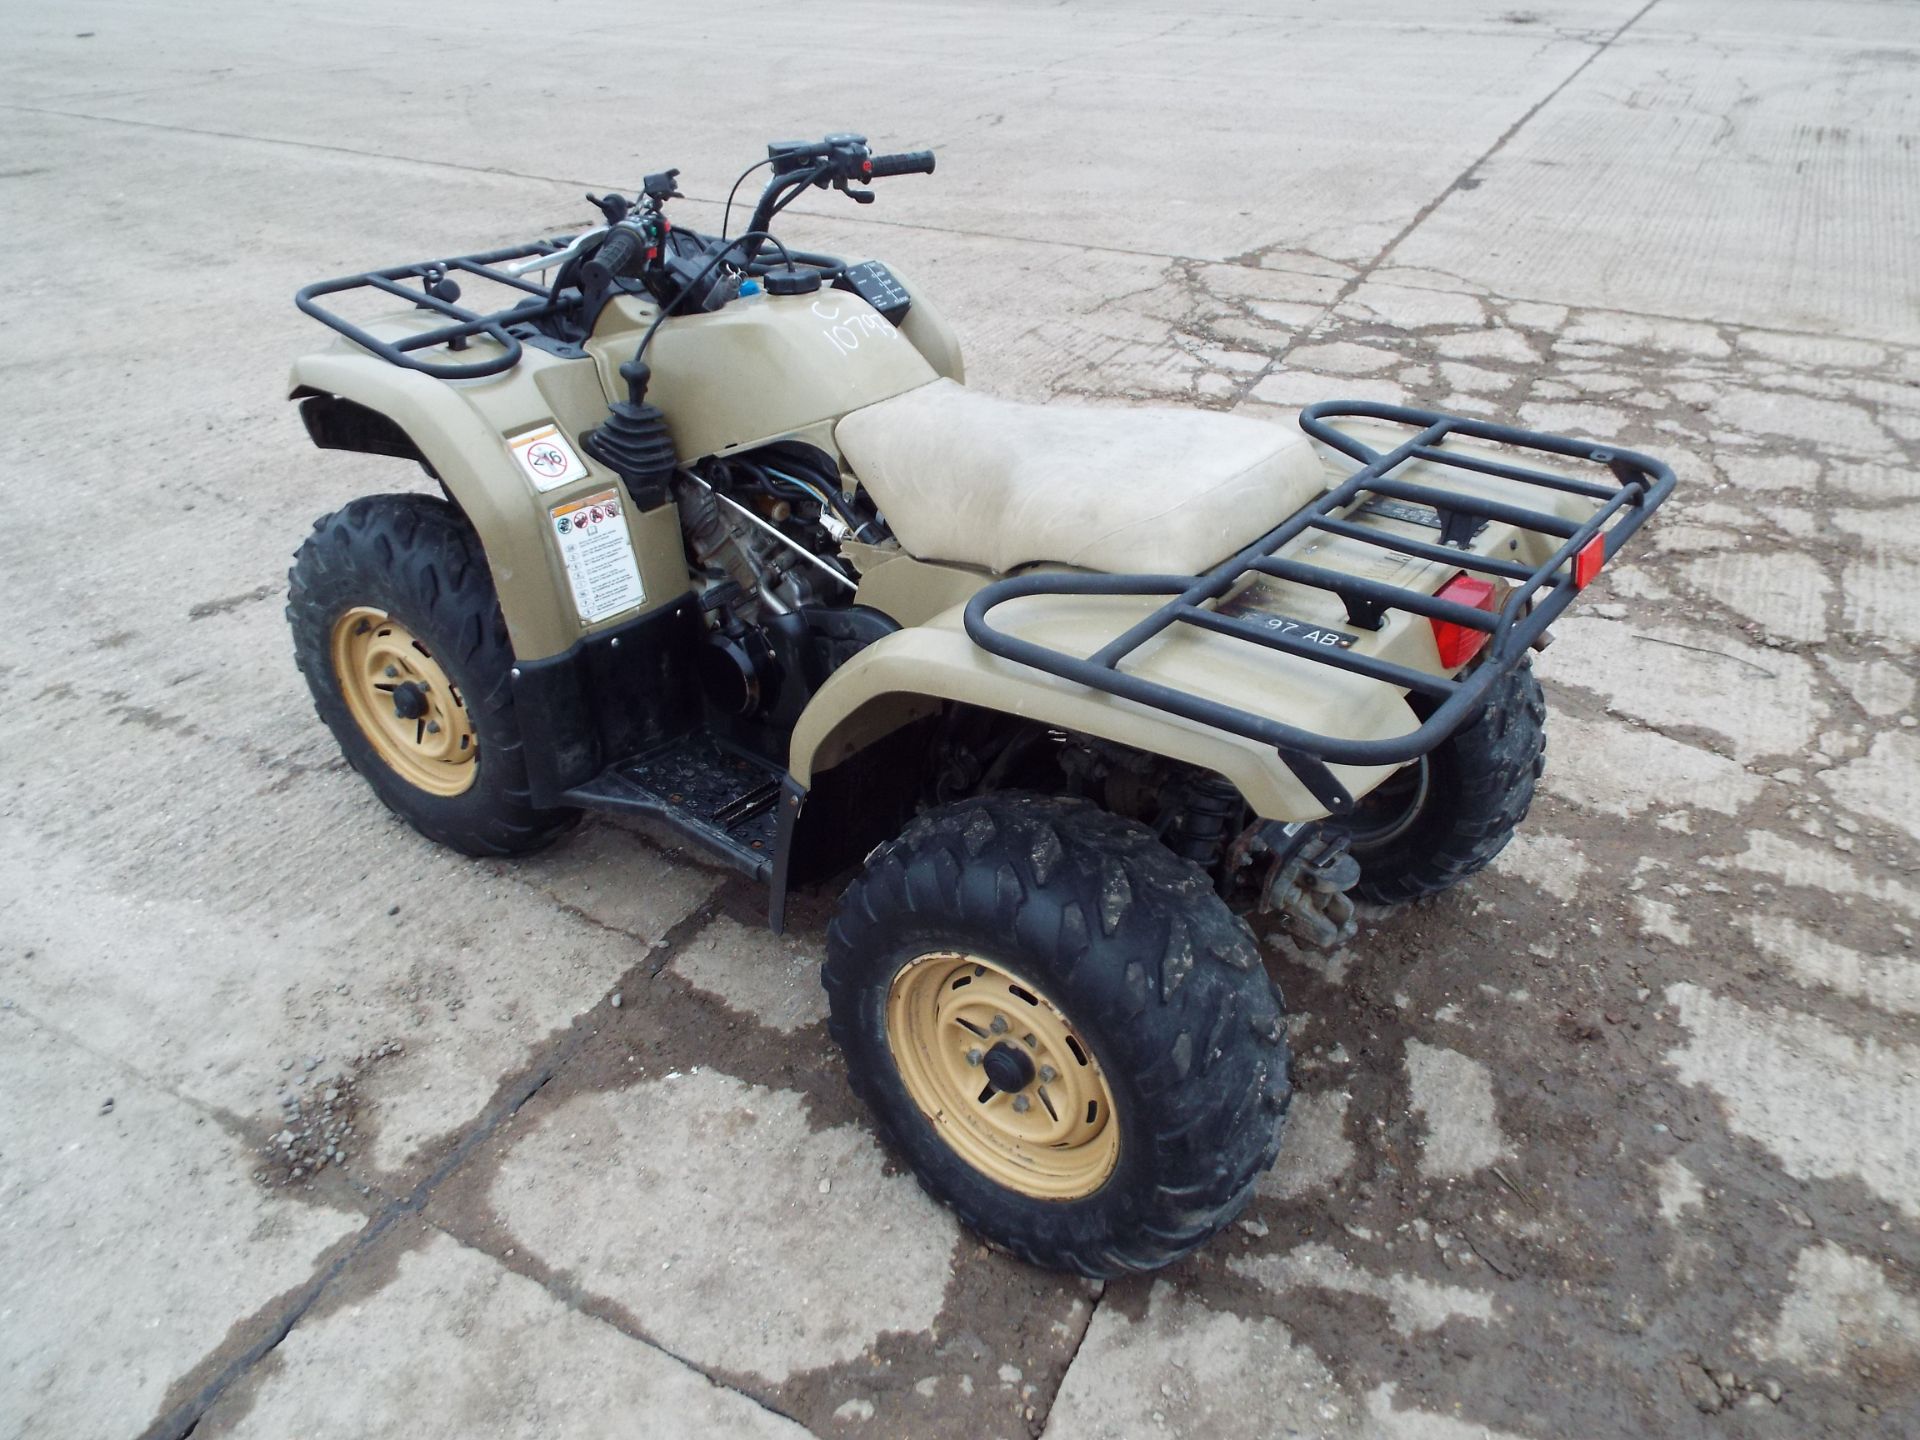 Military Specification Yamaha Grizzly 450 4 x 4 ATV Quad Bike Complete with Winch - Image 5 of 20